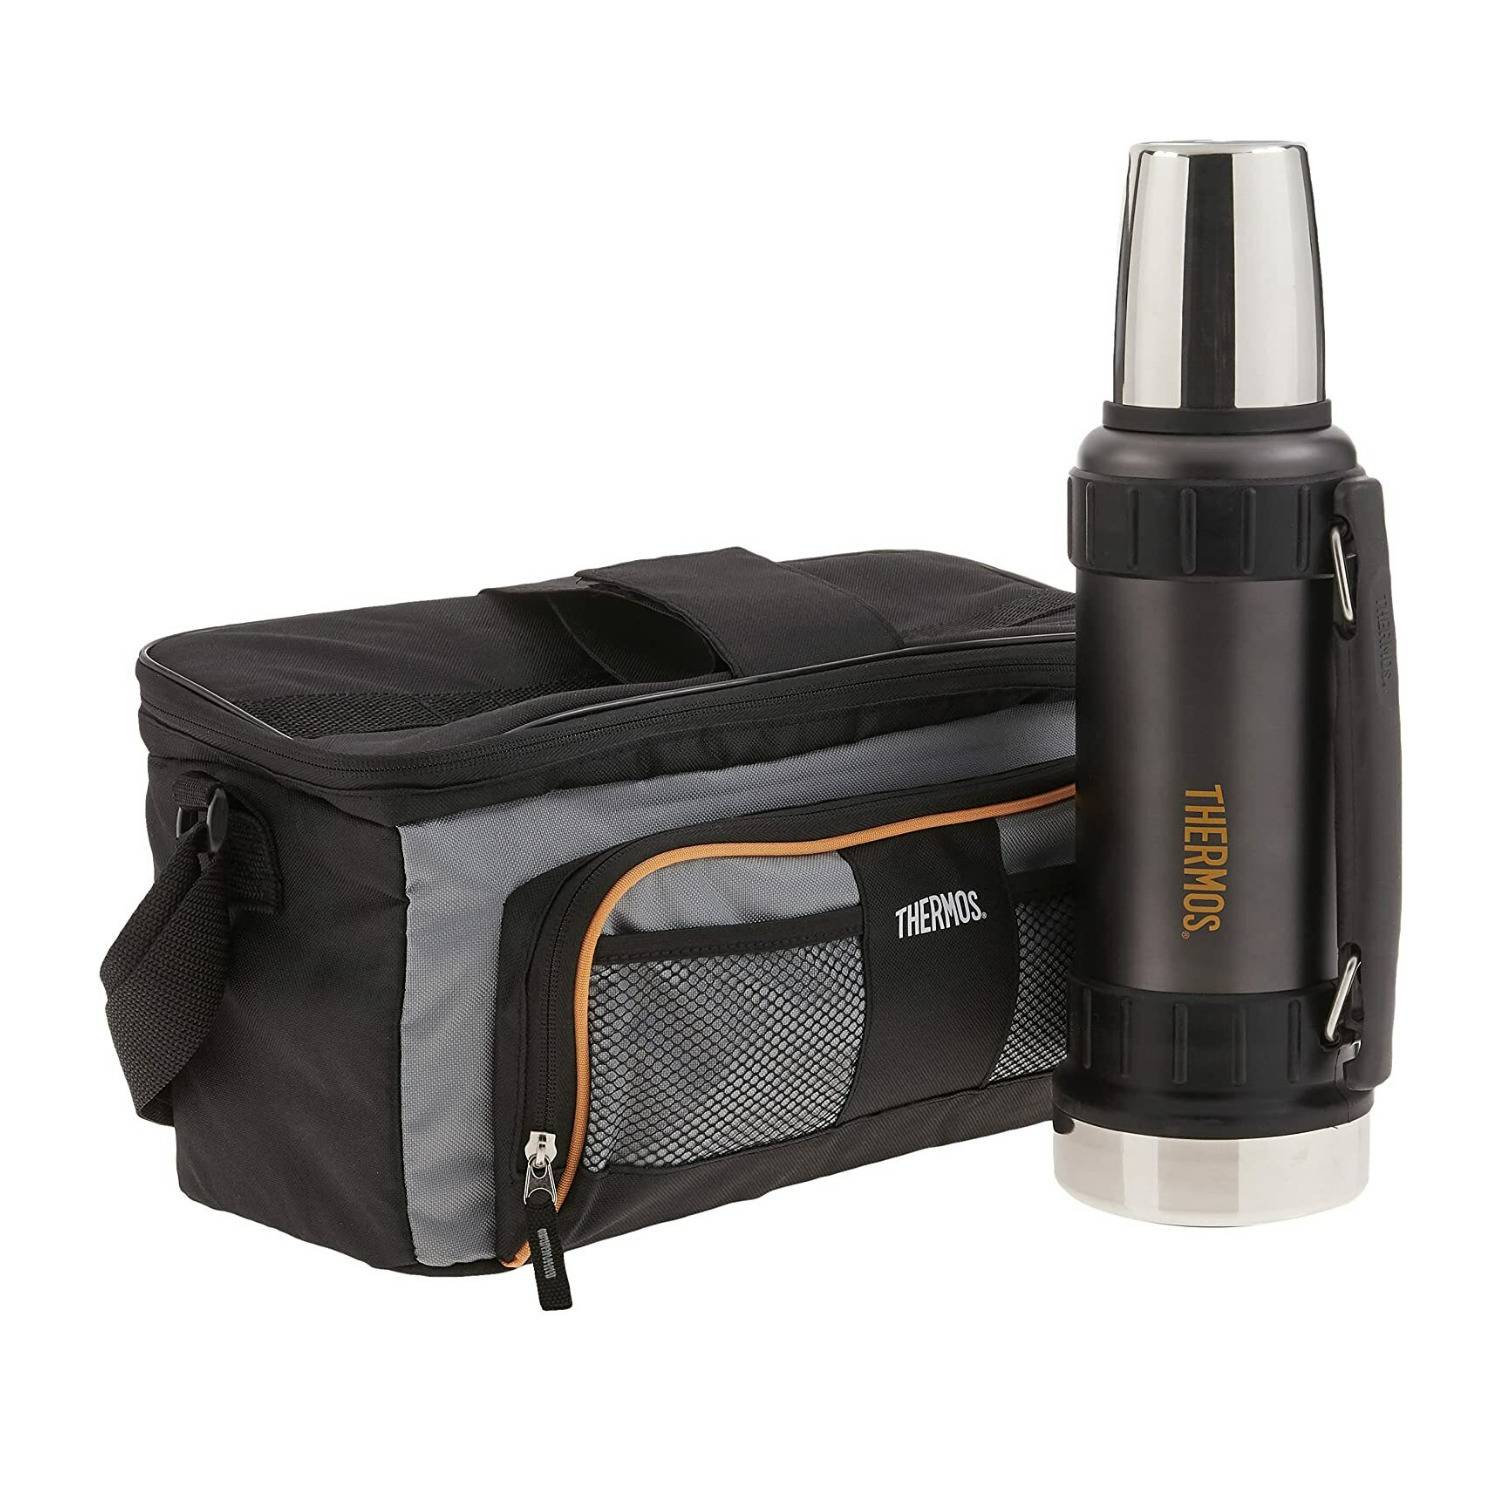 Thermos Lunch Lugger Cooler and Beverage Bottle Combination Set (Gray)